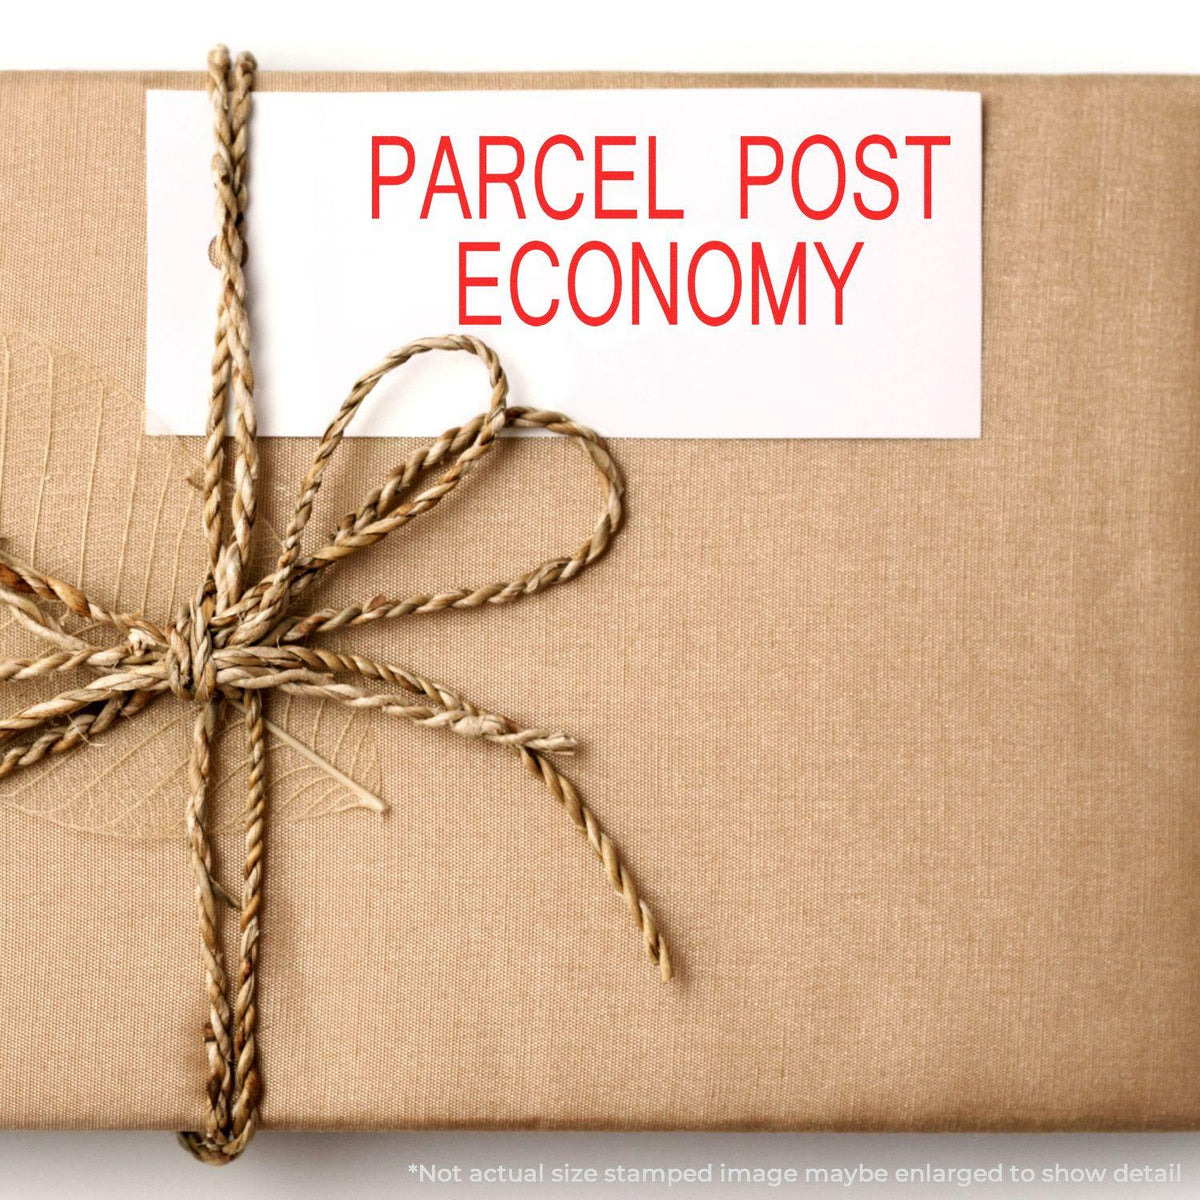 In Use Large Parcel Post Economy Rubber Stamp Image